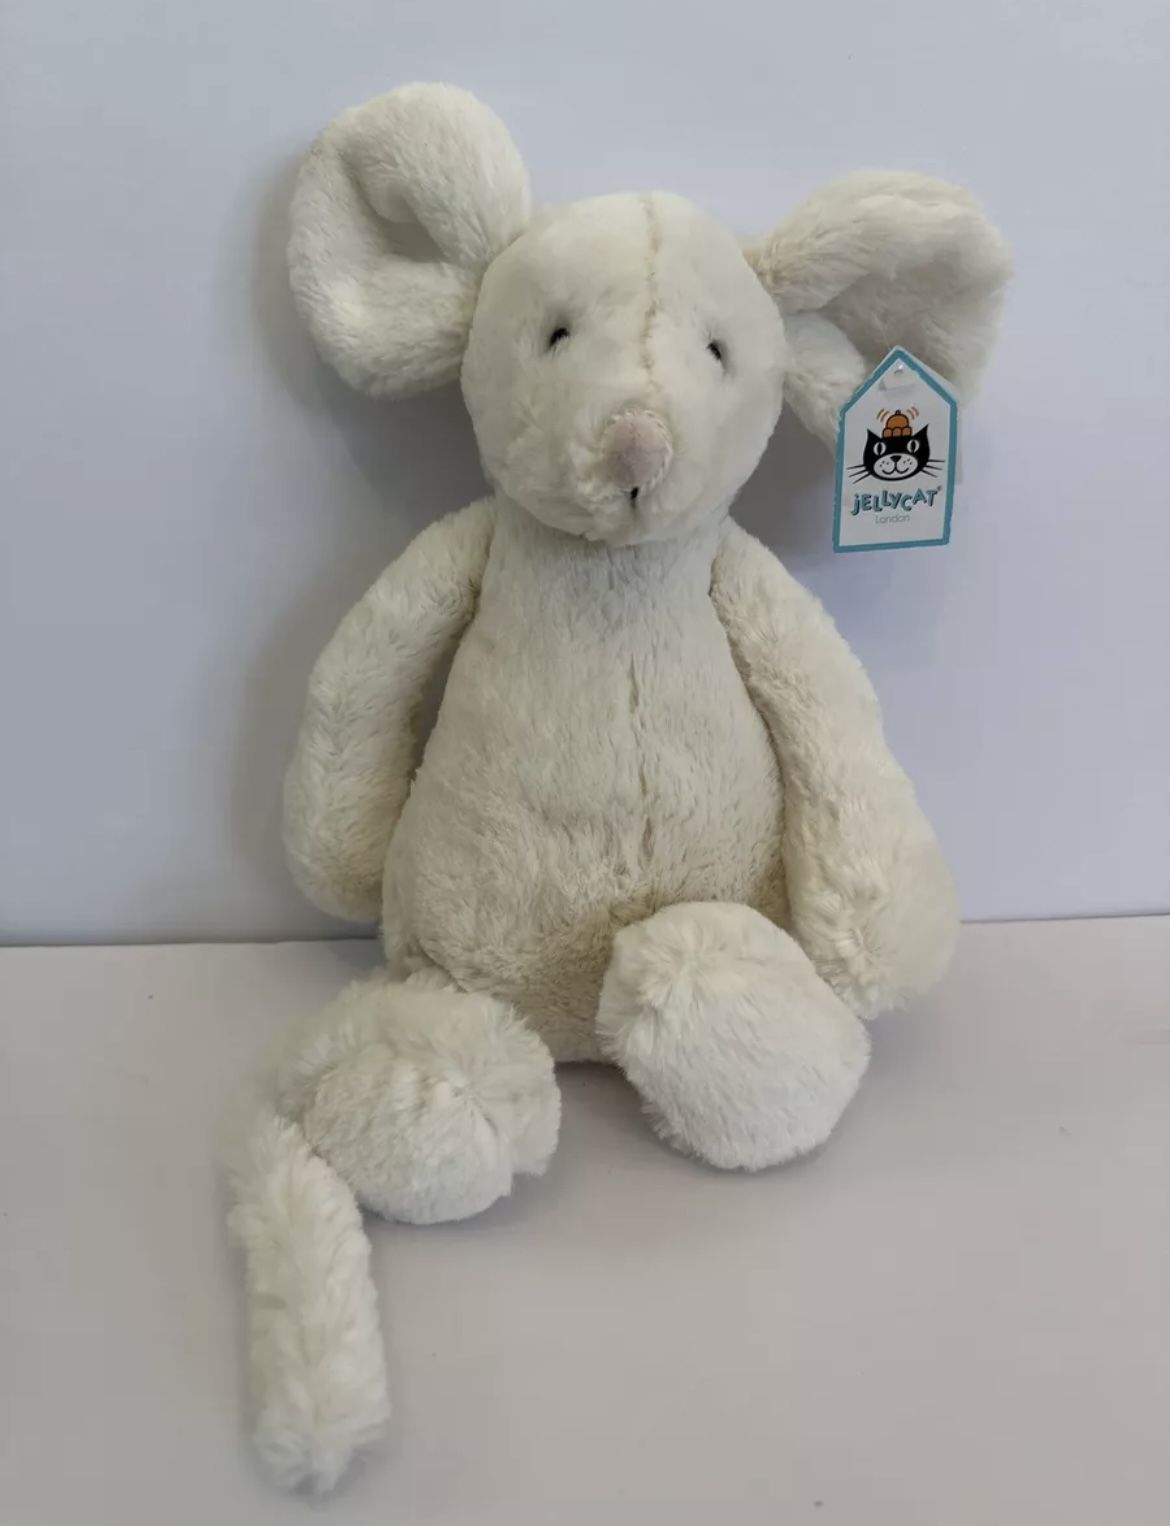 Jellycat Medium Bashful Cream Mouse With Tags